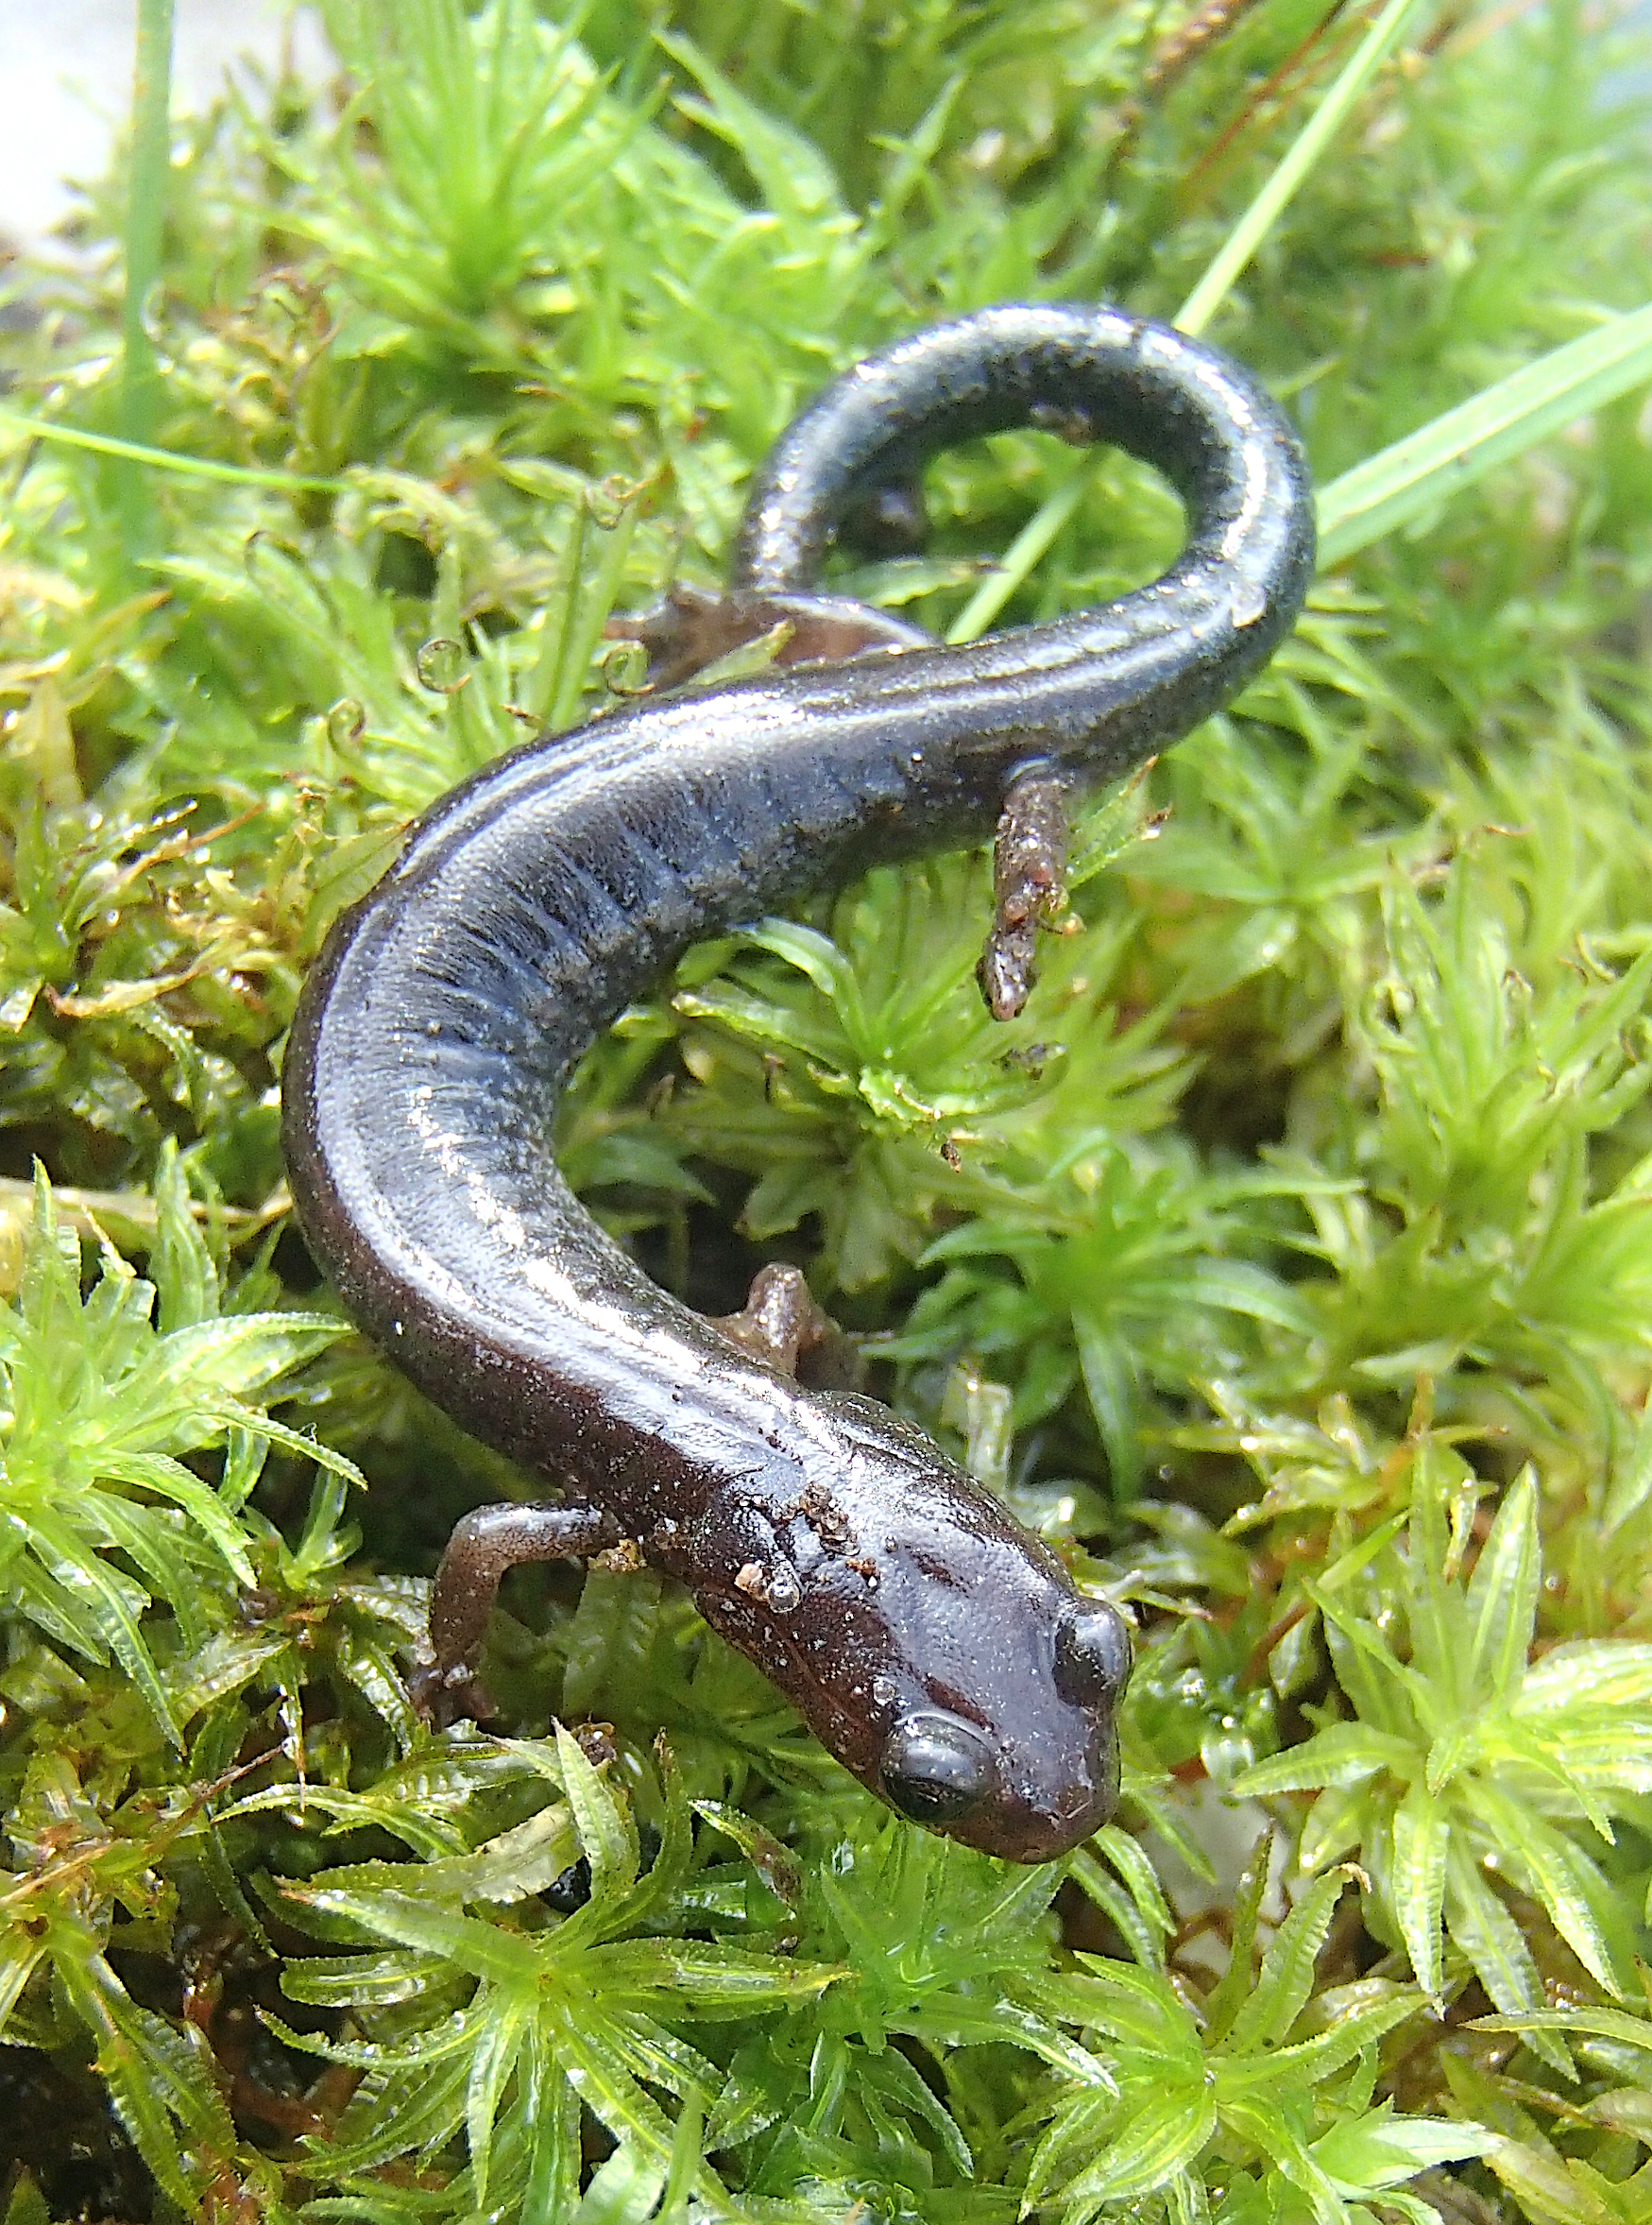 Our more common Eastern red-backed salamander. The gray phase is most common on eastern L.I. while the red phase is most prevalent to the west.